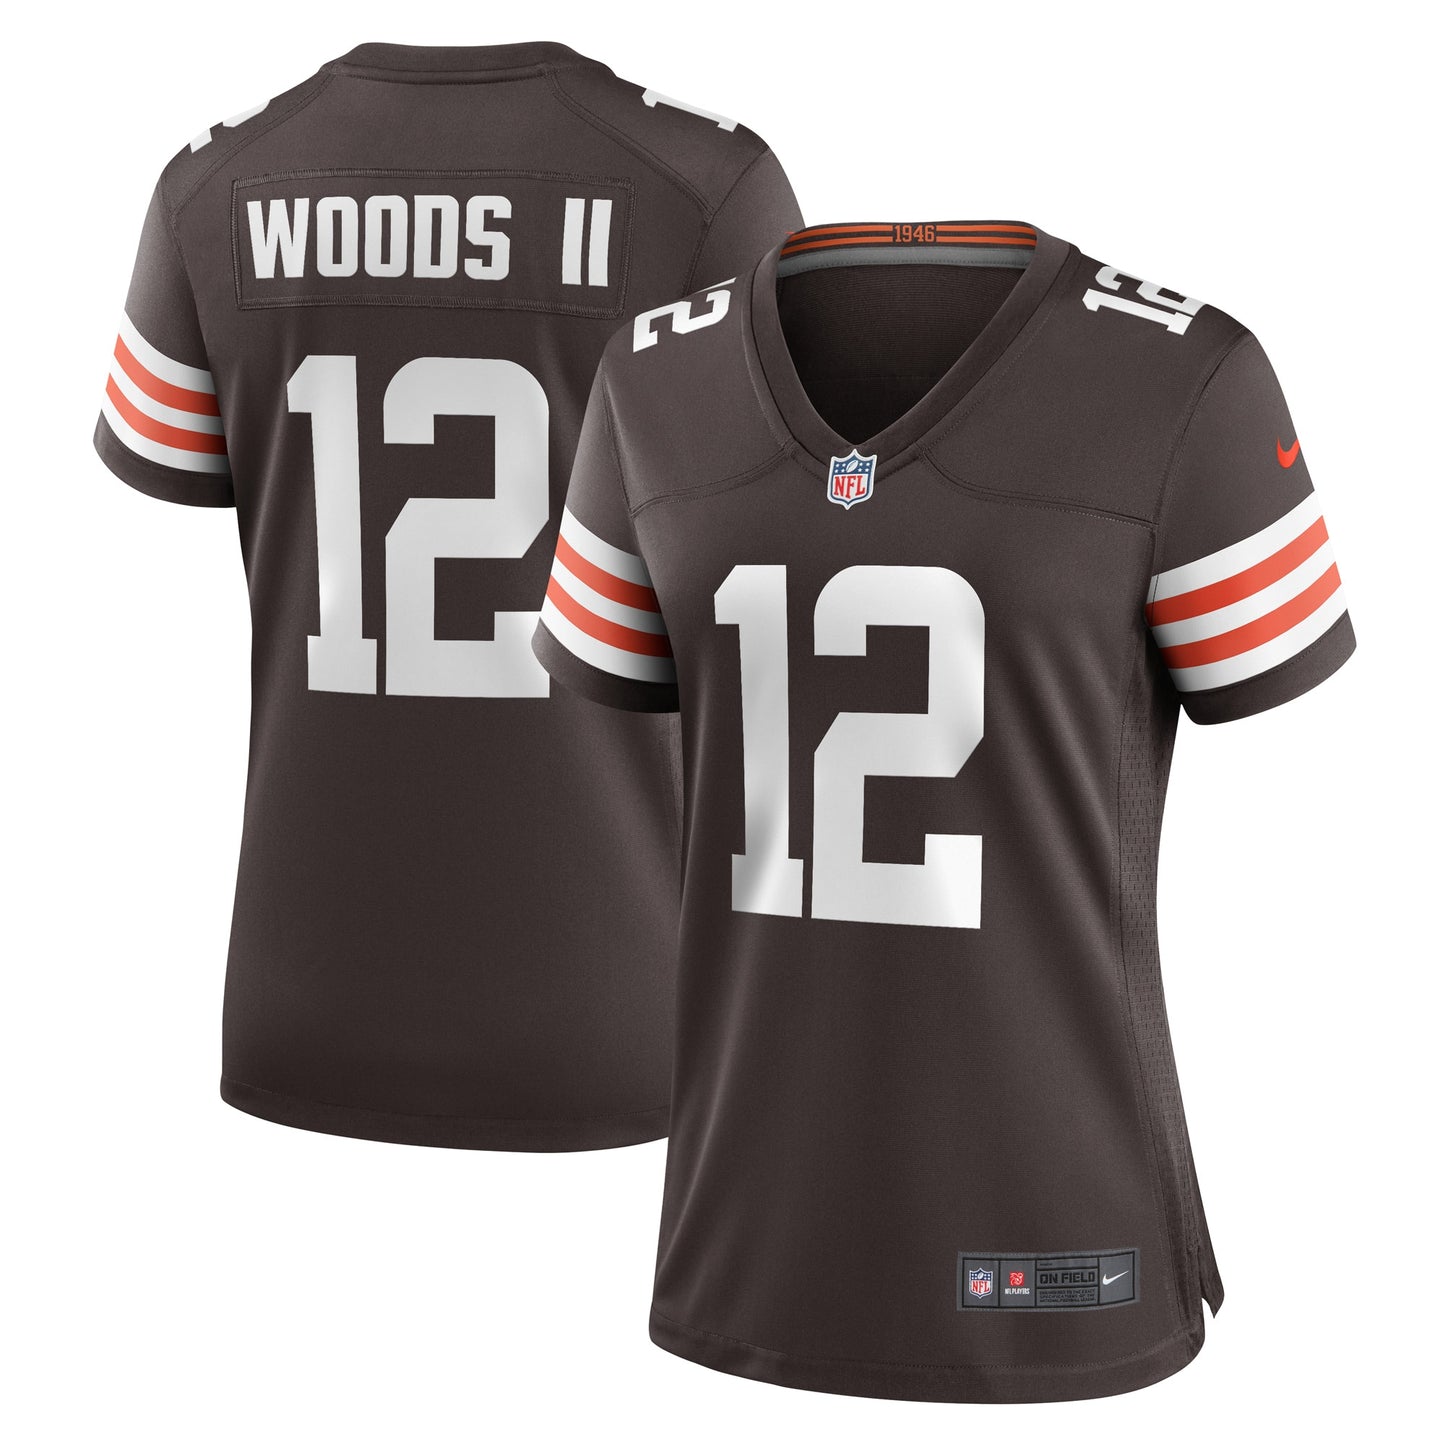 Michael Woods II Cleveland Browns Nike Women's Game Player Jersey - Brown